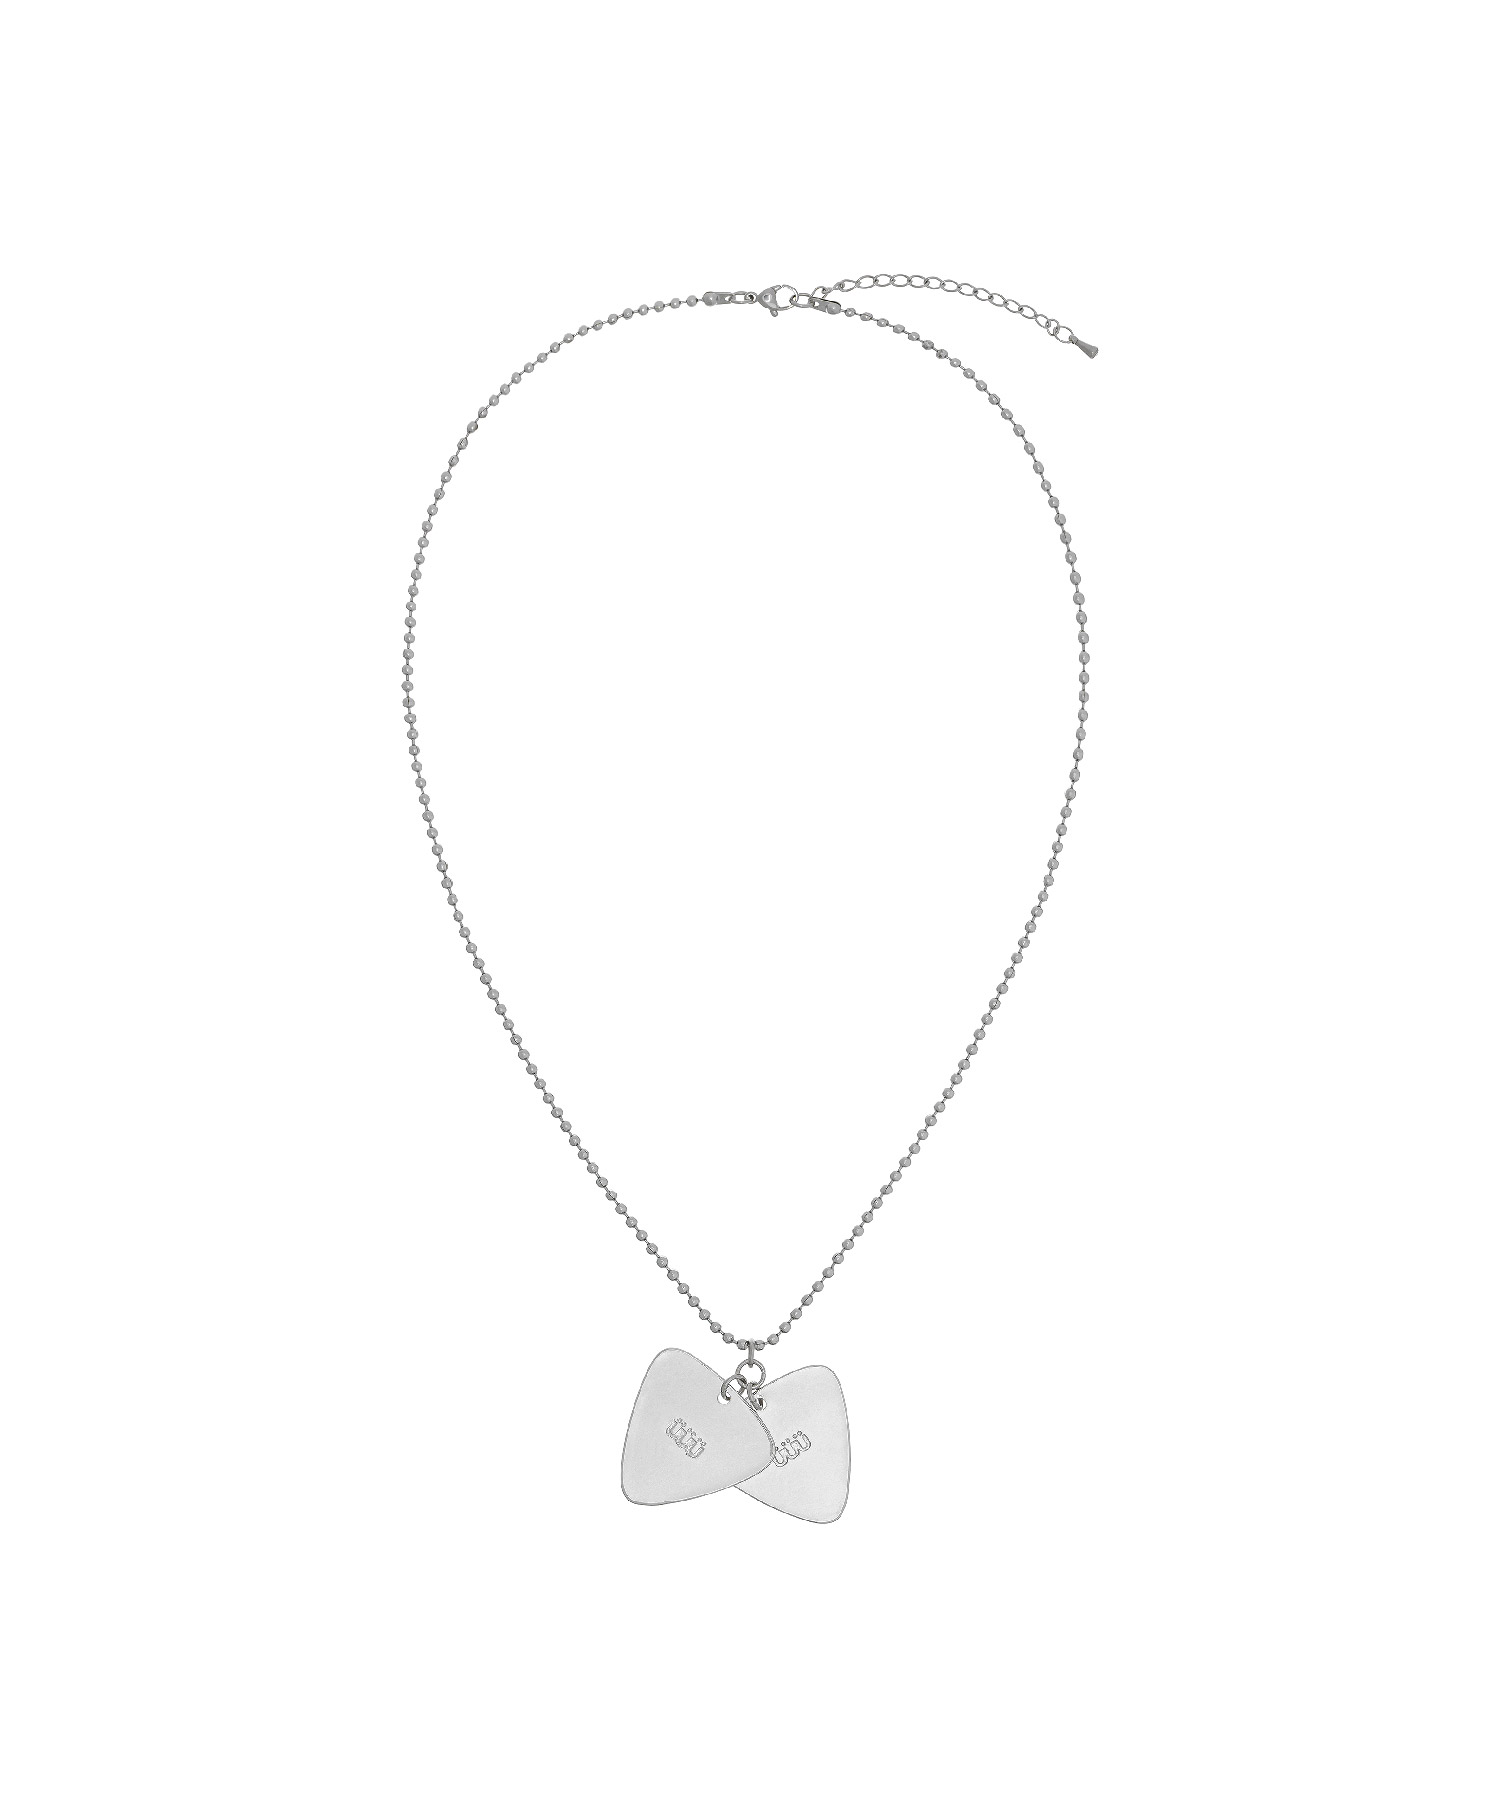 2 PICK NECKLACE[SILVER]